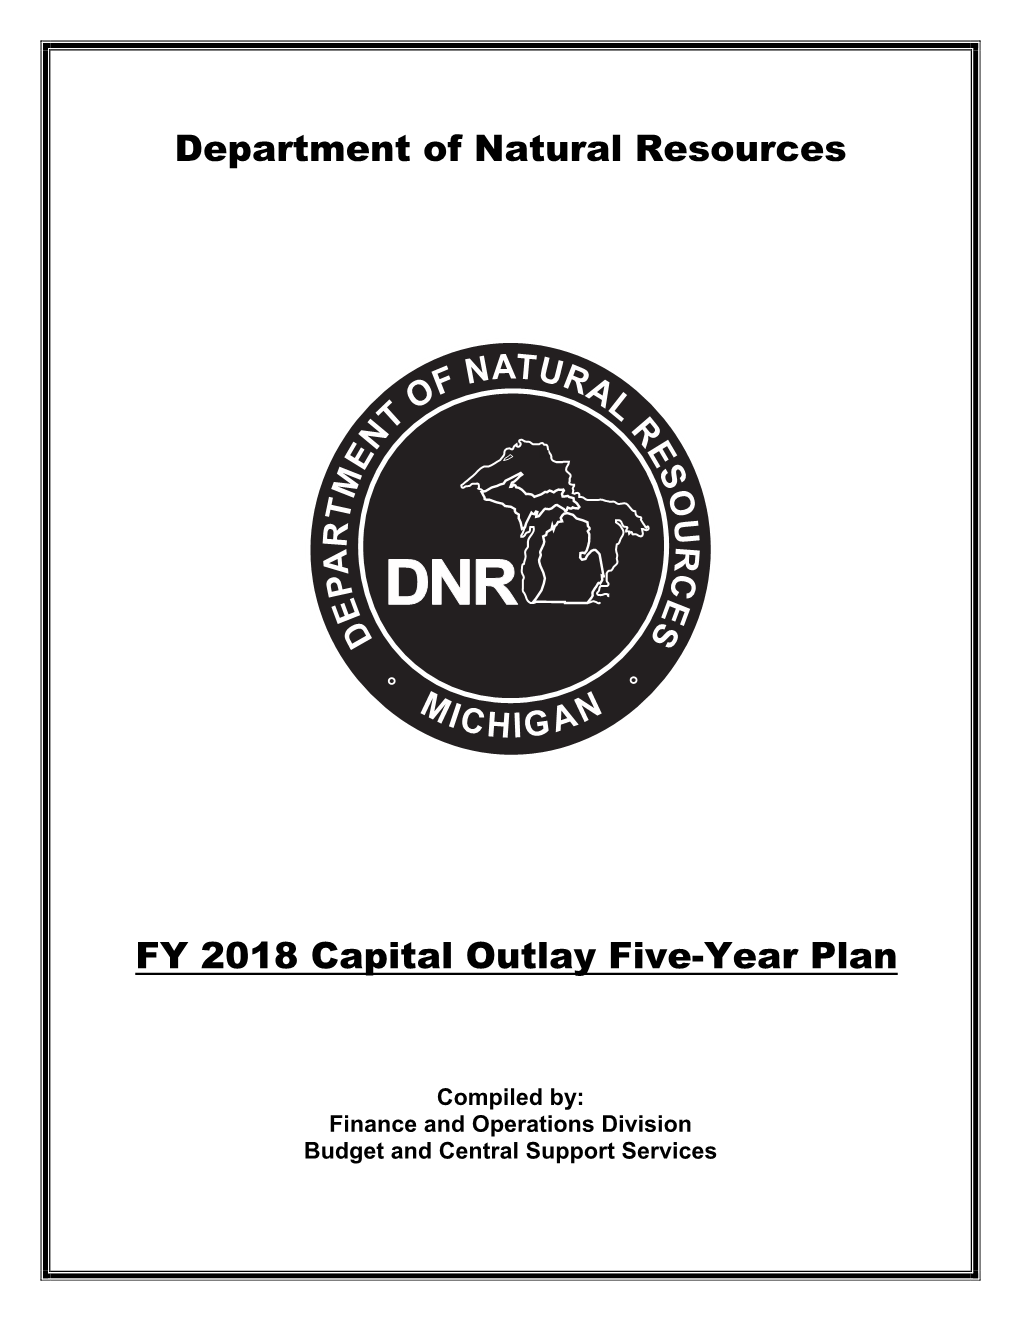 Department of Natural Resources FY 2018 Capital Outlay Five-Year Plan